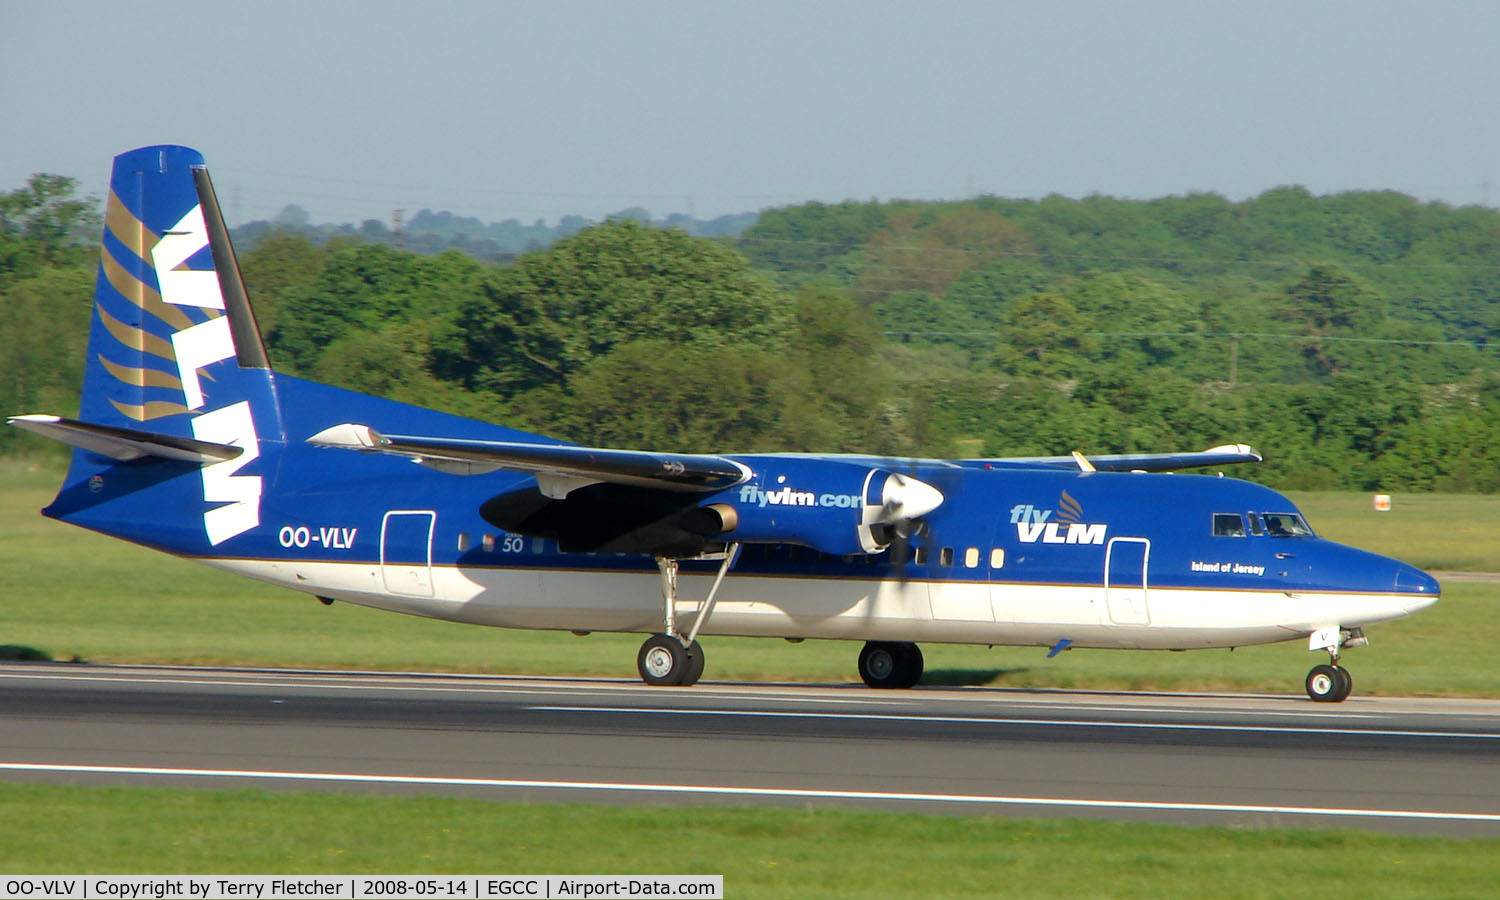 OO-VLV, 1989 Fokker 50 C/N 20160, Some of the typical traffic that can be seen at Manchester (Ringway)  International